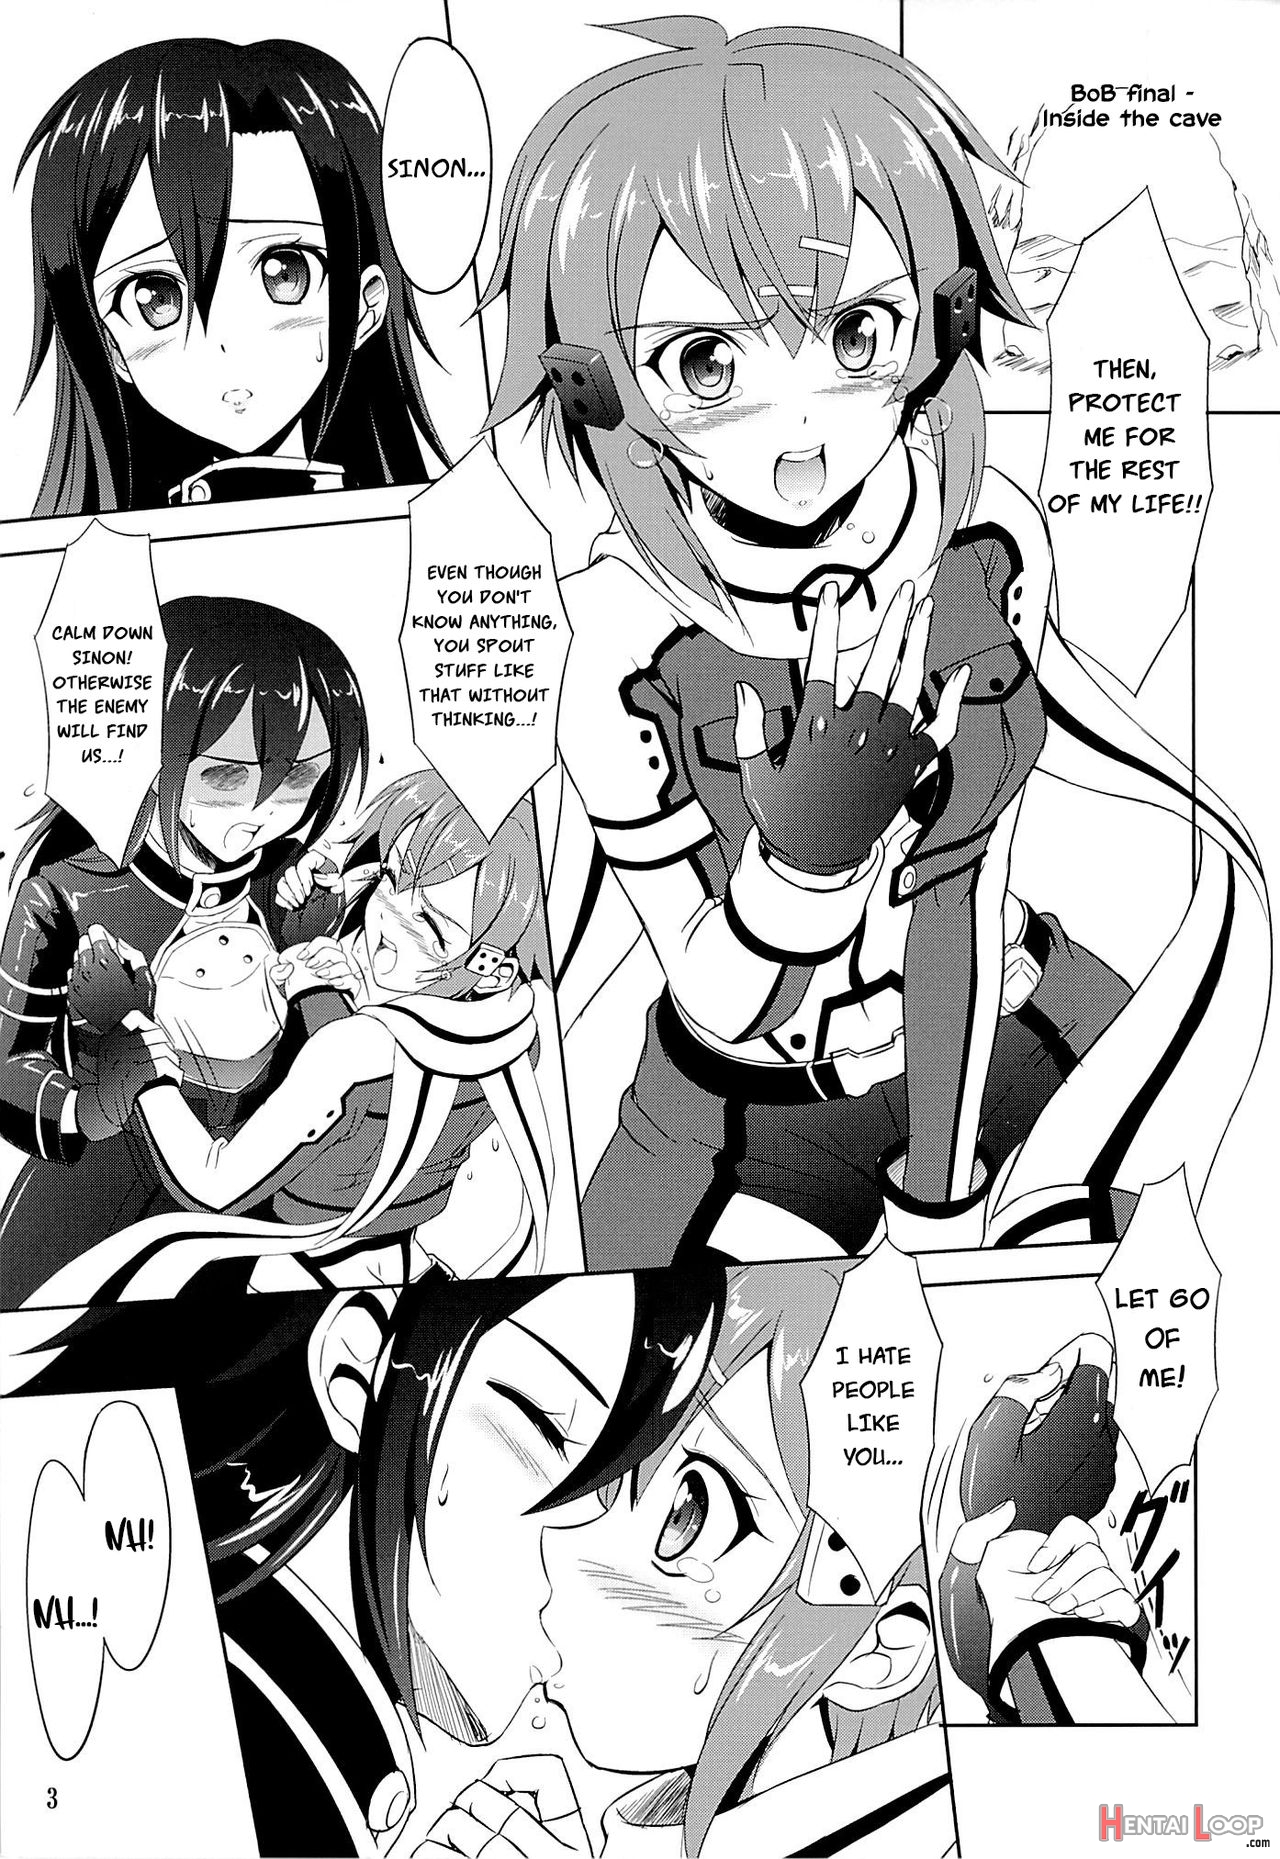 Sinon On The Counterattack page 2